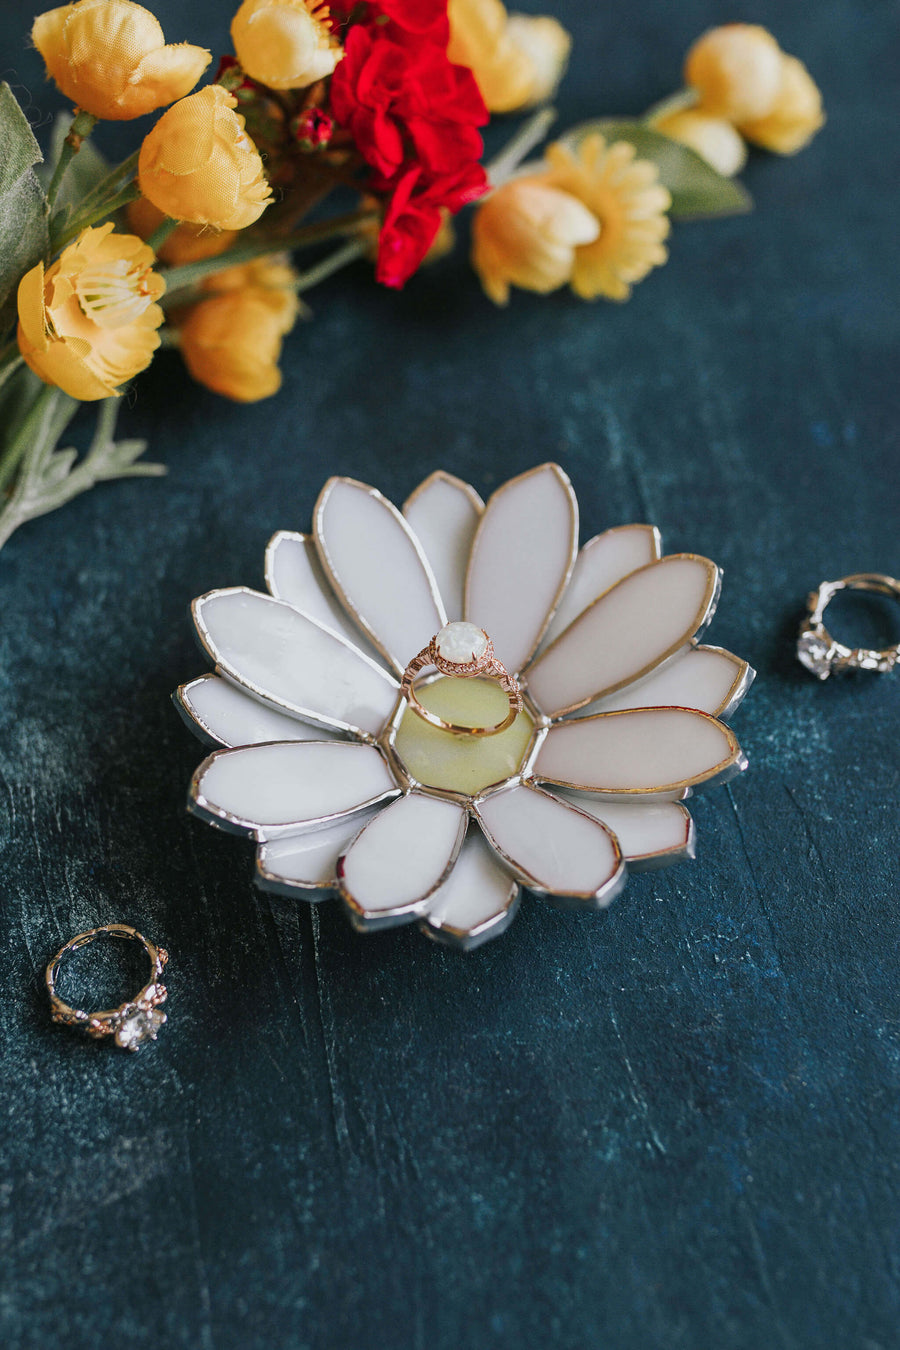 stained-glass-daisy-wedding-ring-dish-by-waen